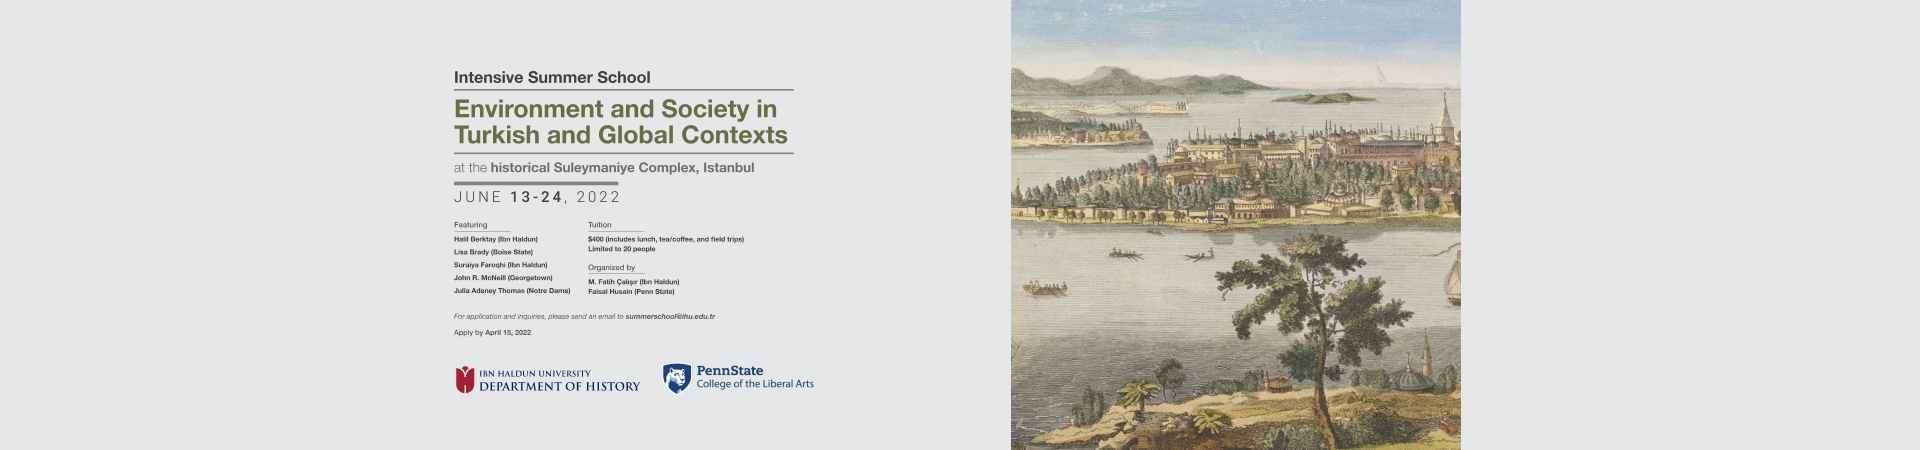 Intensive Summer School: Environment and Society in Turkish and Global Contexts